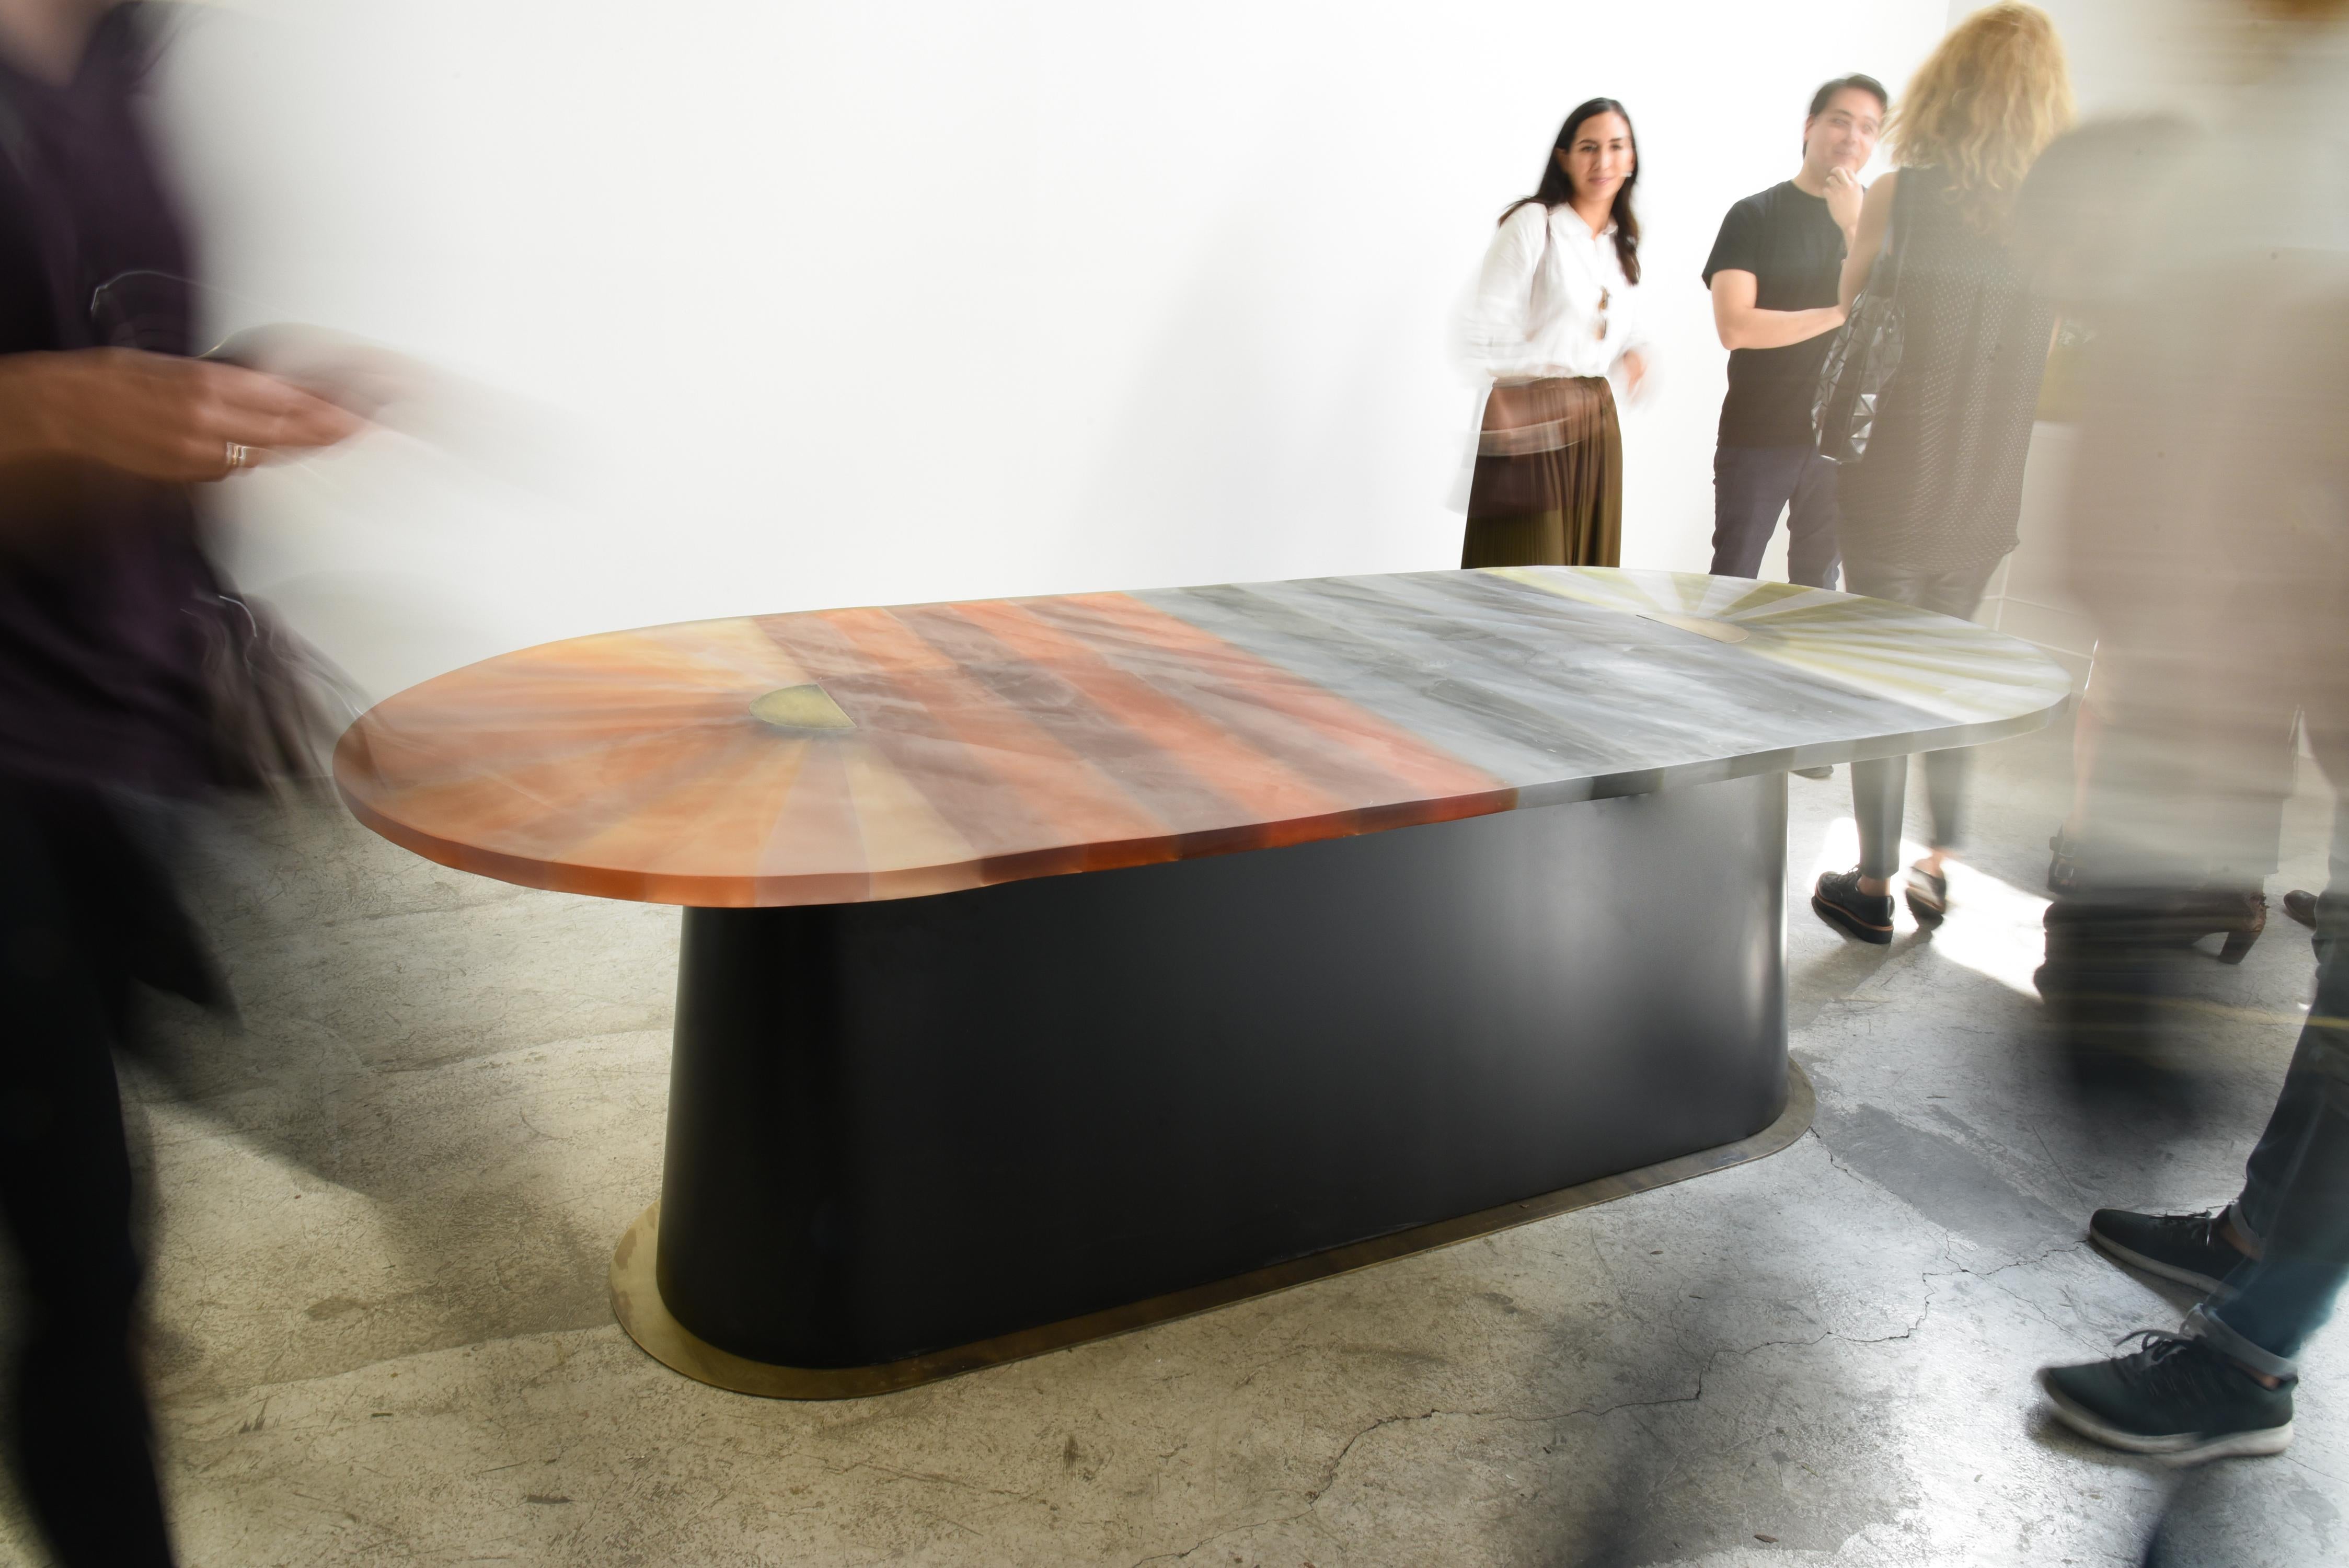 Oval dining table
Resin top
Wood veneer and brushed brass base
This family of furniture pieces is a collaboration between designers Ezequiel Farca + Cristina Grappin and Moises Hernandez. The idea behind this proposal is a chromatic experimentation